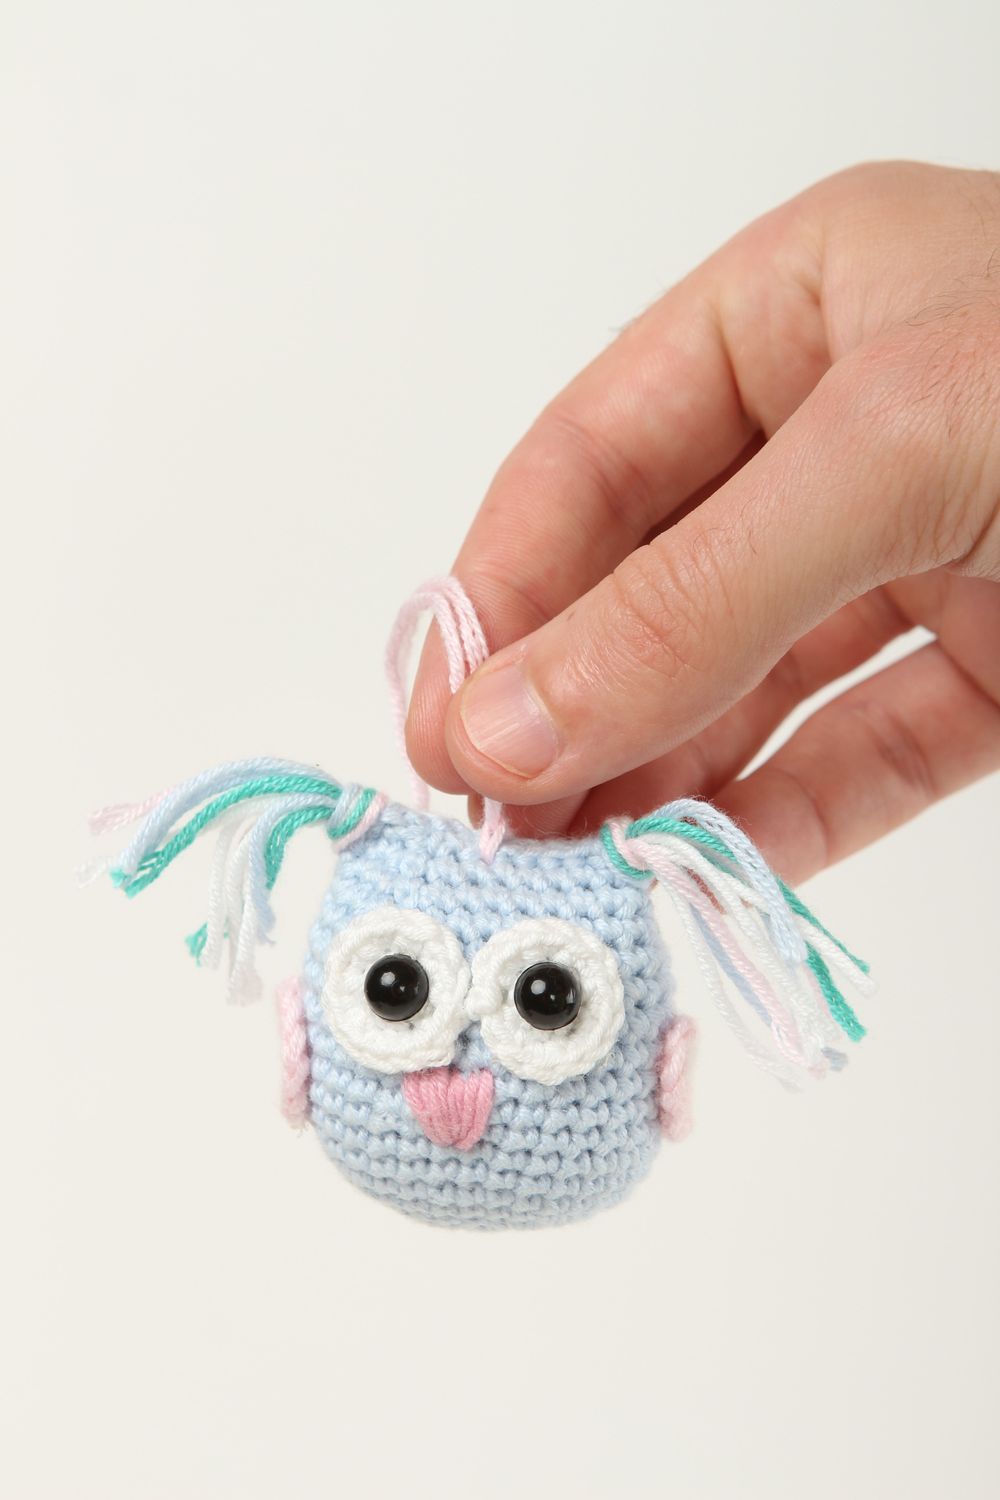 Handmade soft toy small owl baby toy handmade soft toy toy for kids home decor photo 5